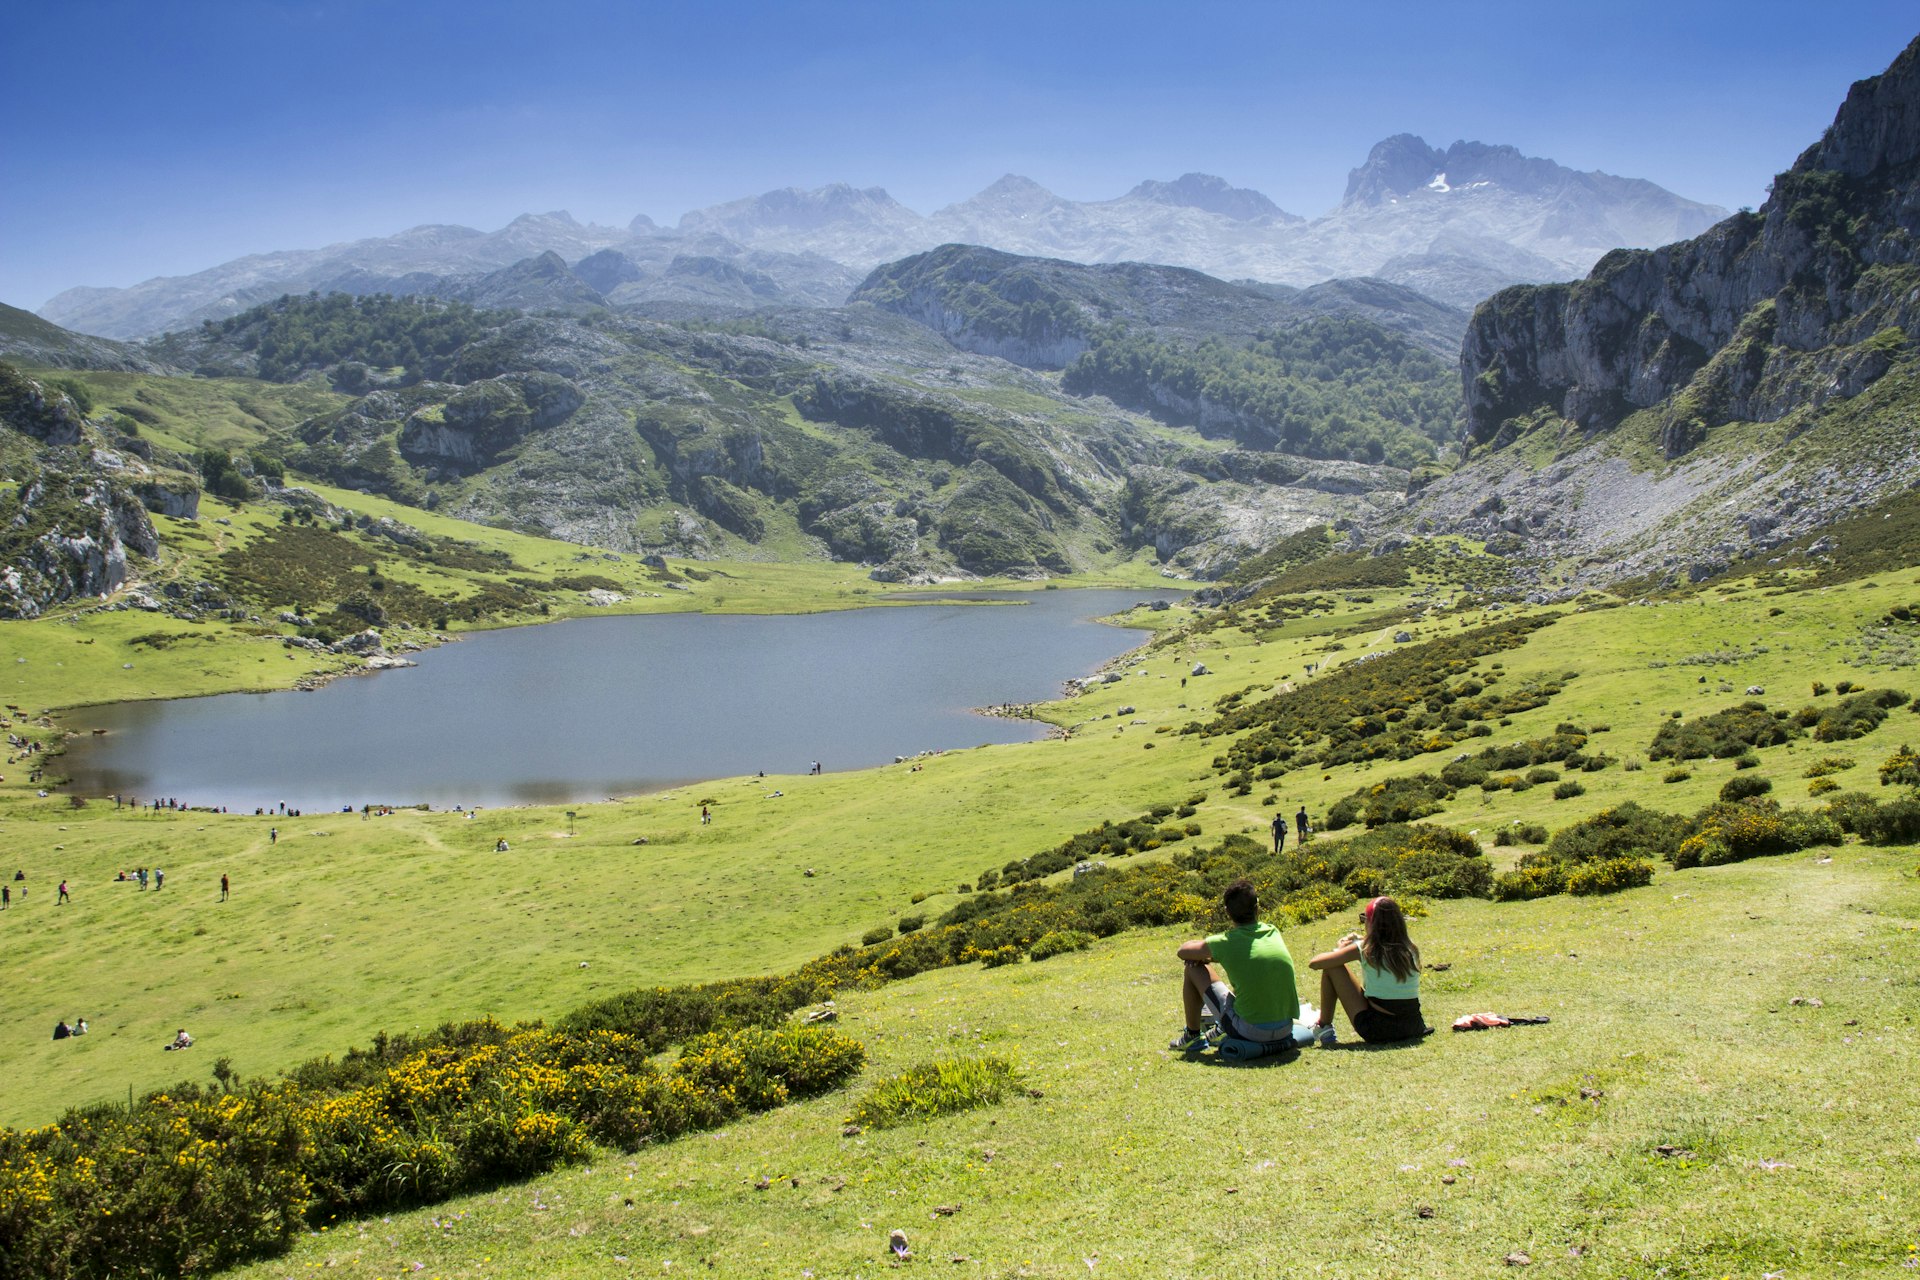 Young couple sitting on the grass overlooking the lakes in a mountainous region